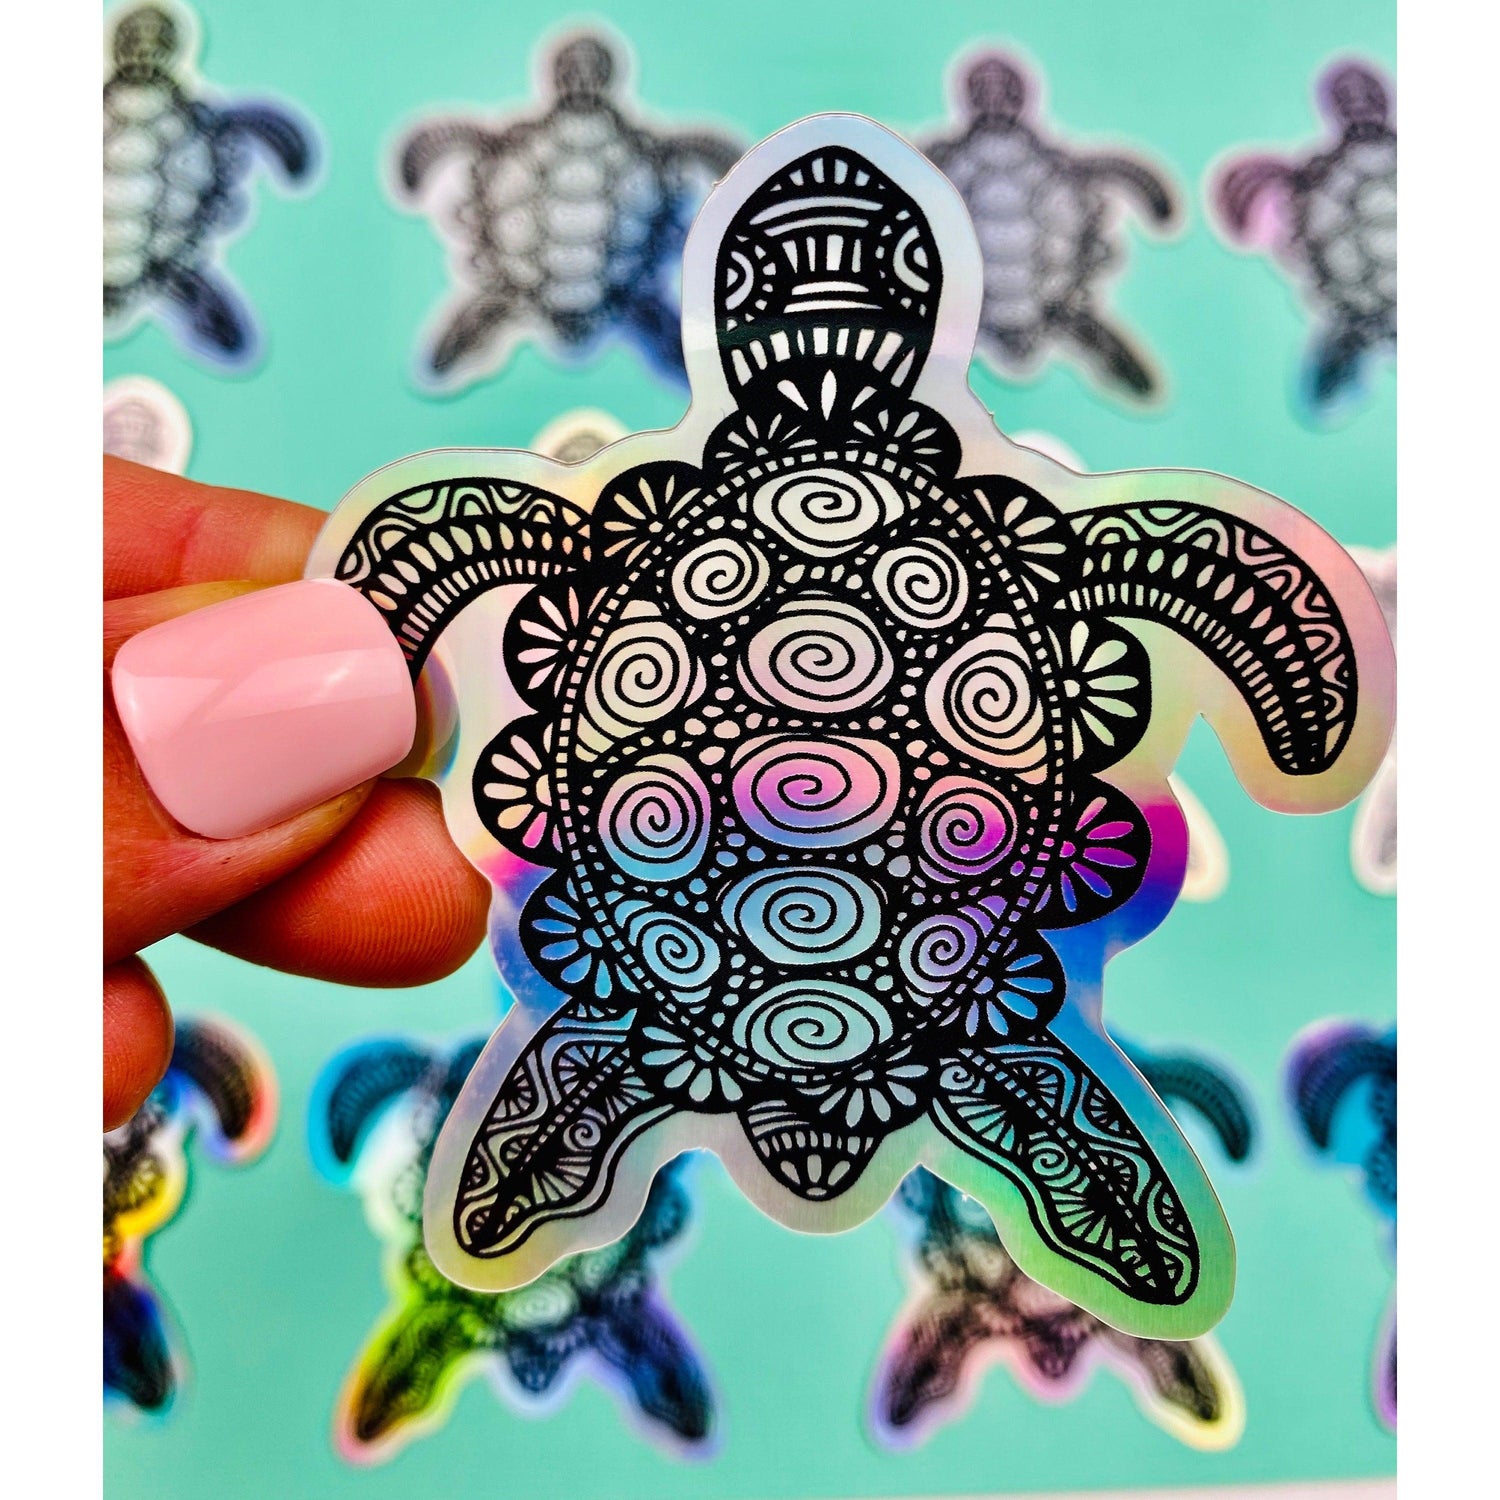 Boho Sea Turtle Holographic Sticker With Intricate Bohemian Design - Ottos Grotto :: Stickers For Your Stuff